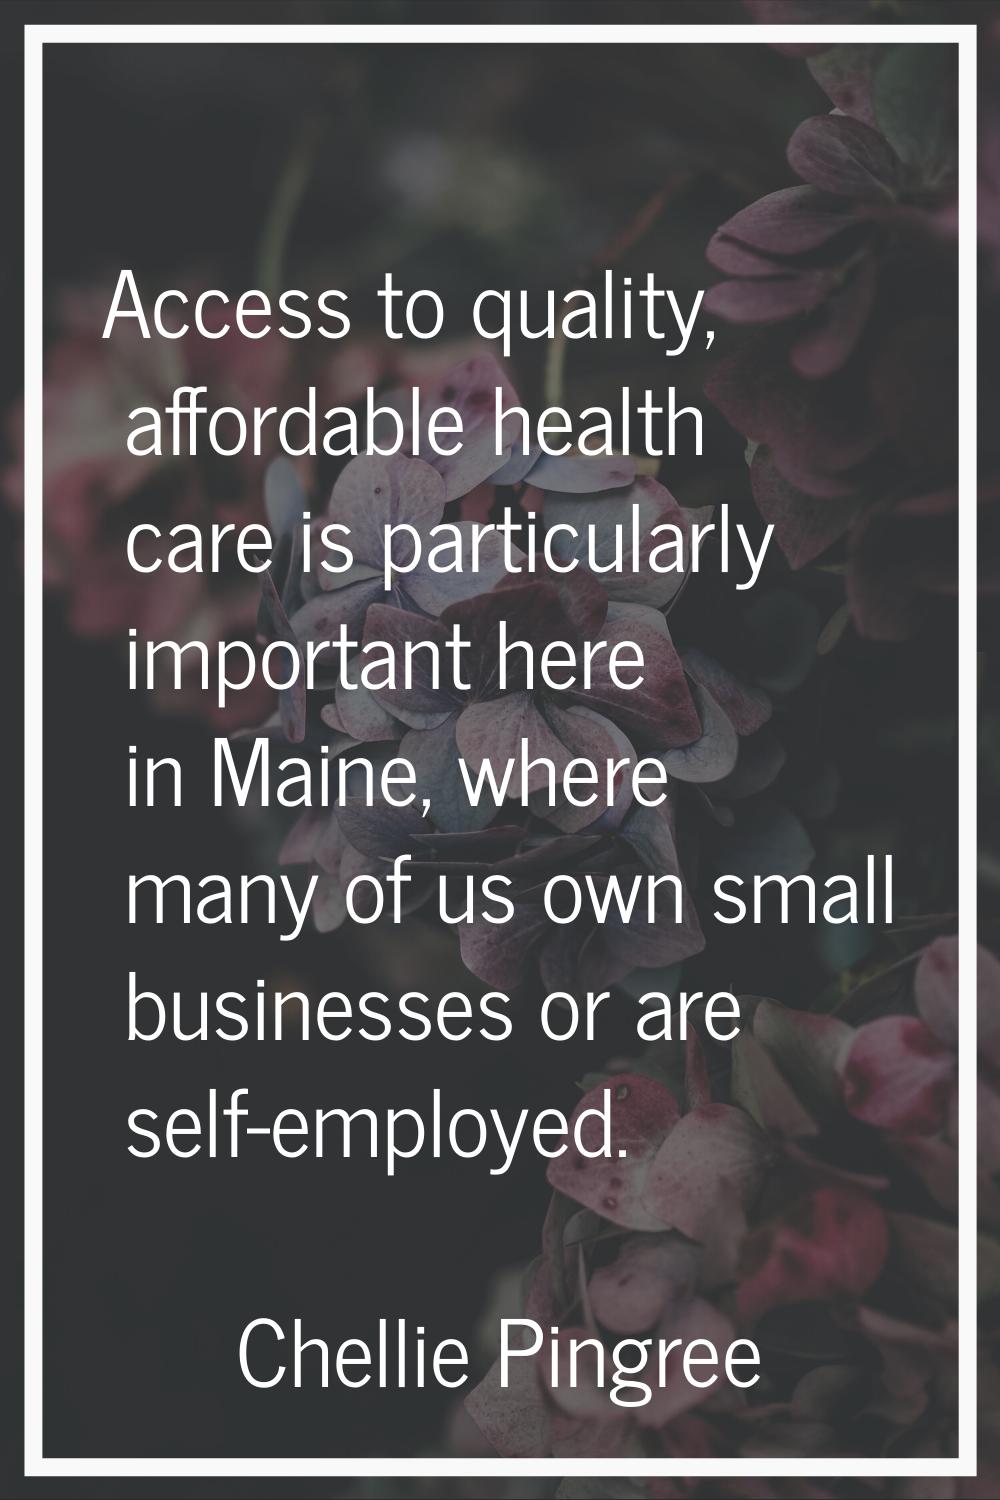 Access to quality, affordable health care is particularly important here in Maine, where many of us